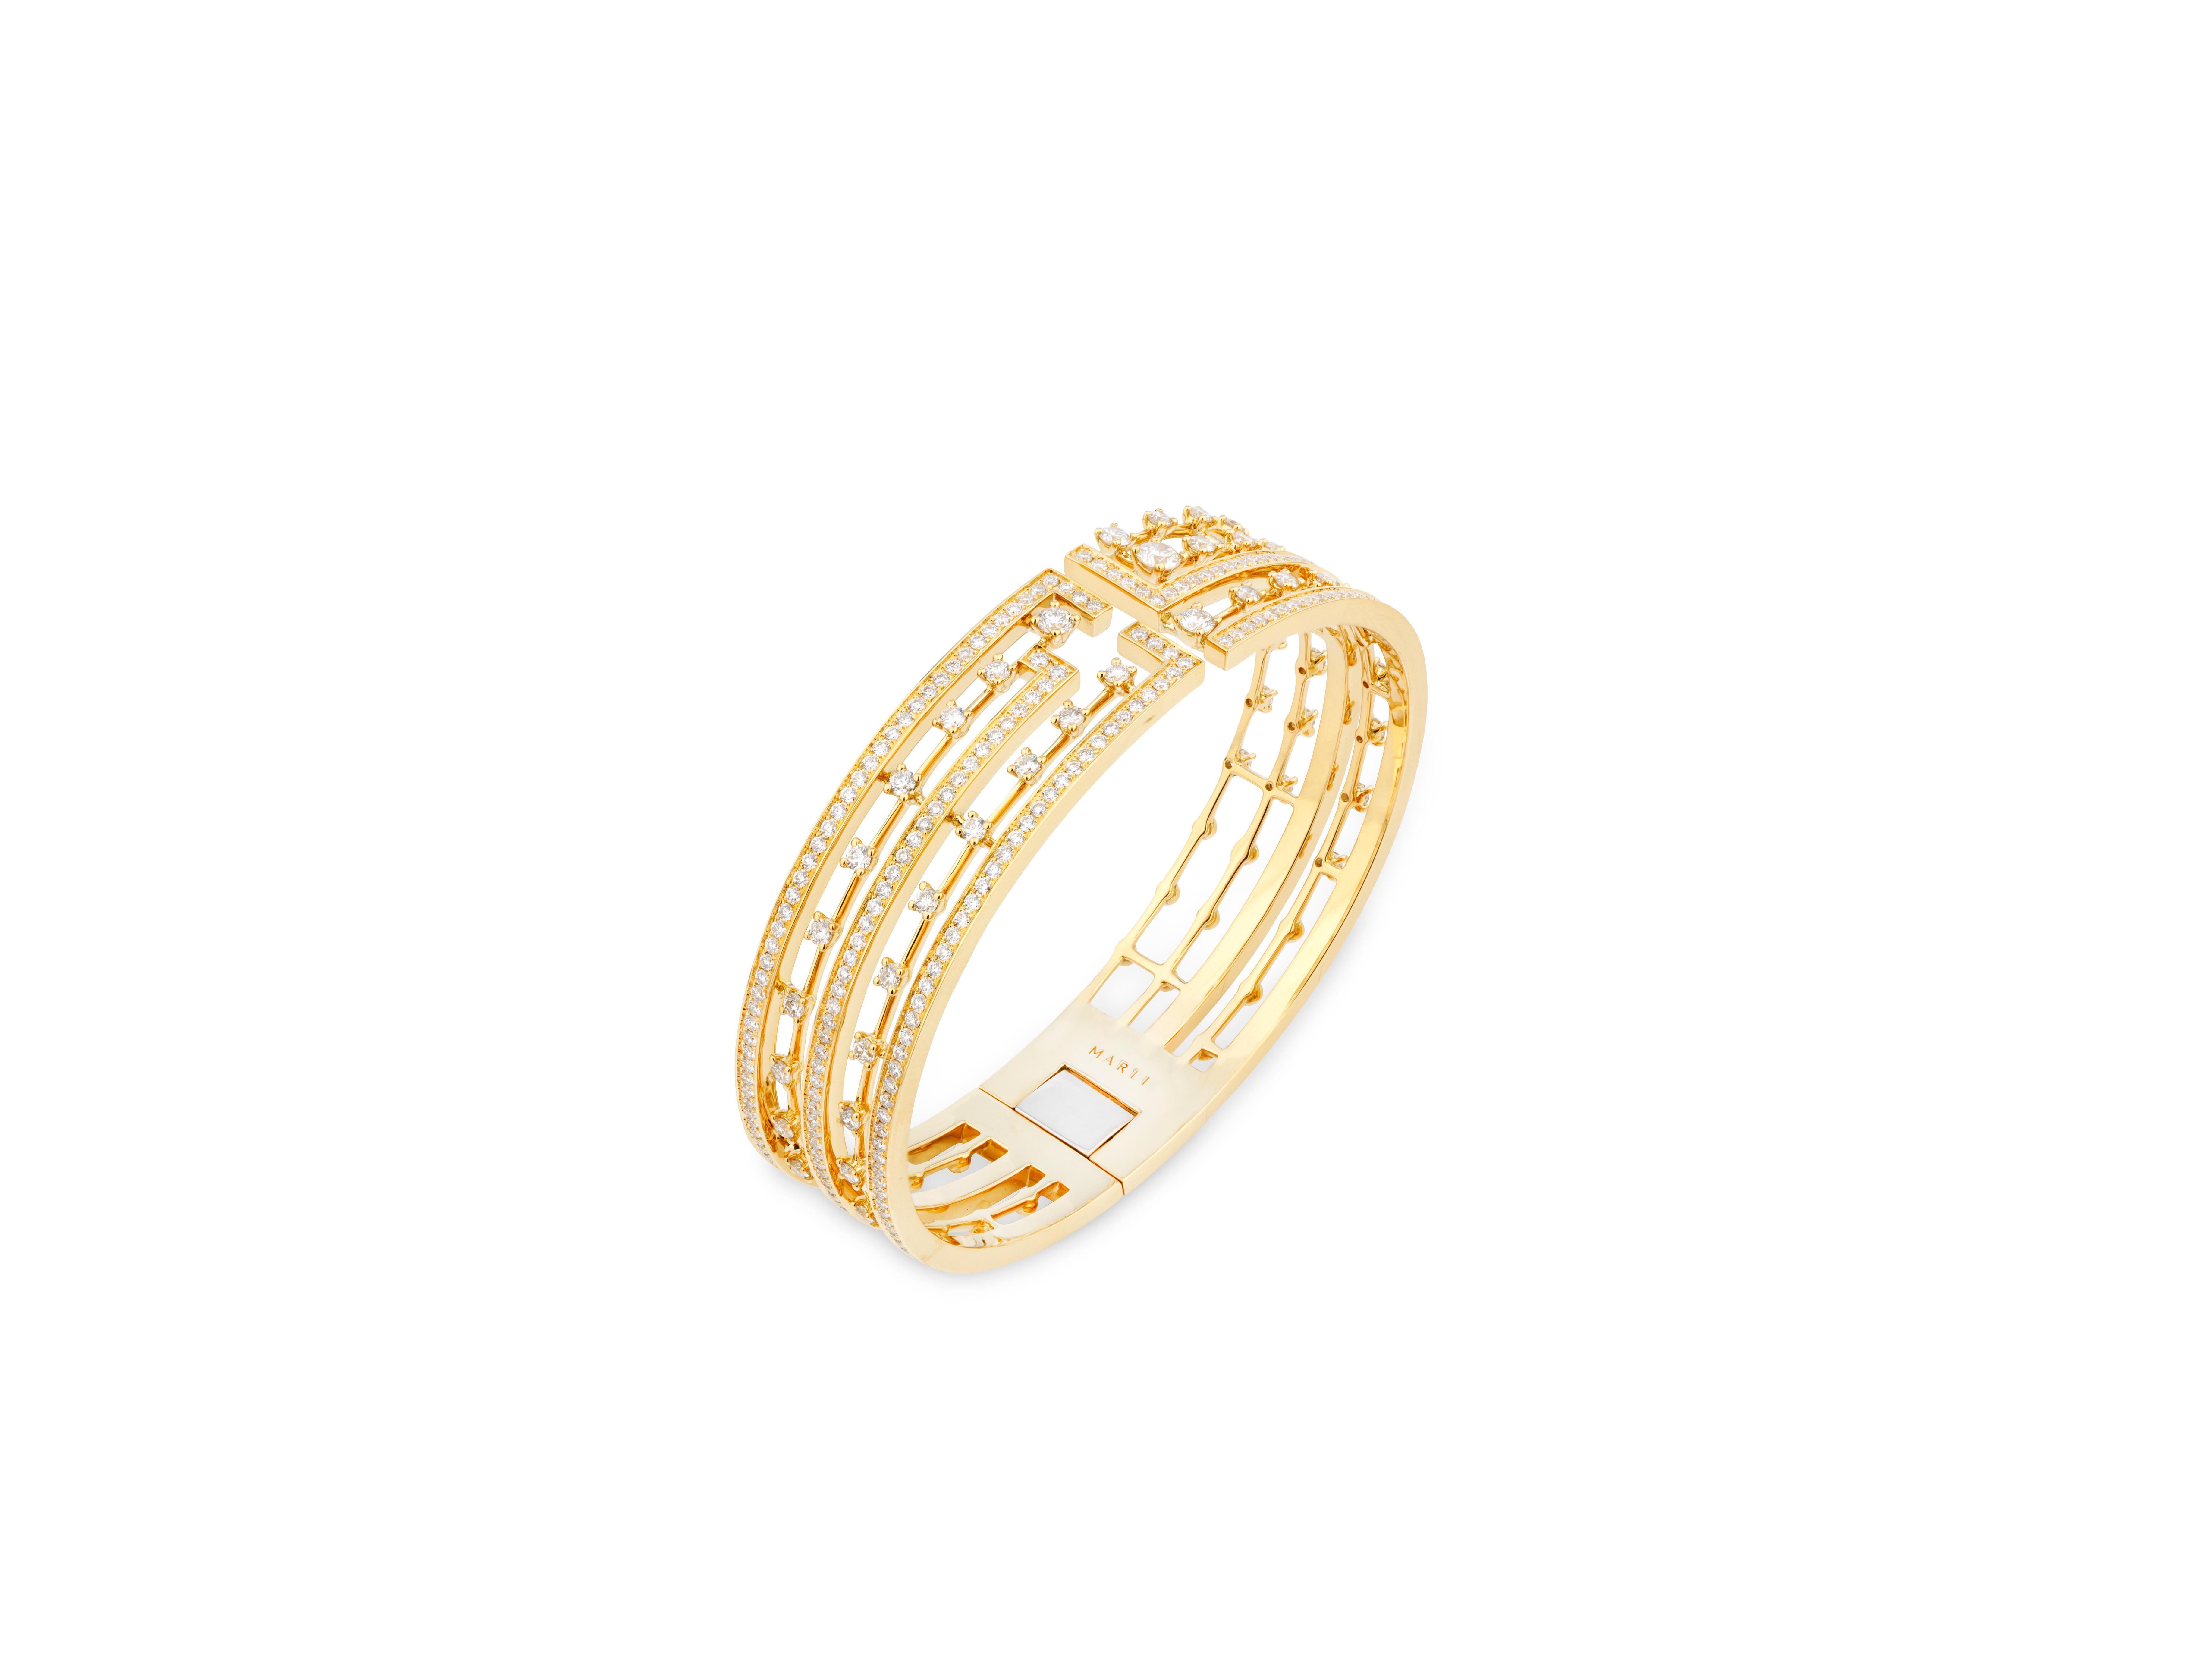 Dotted with diamonds in a gridlock pattern, the Avenues Hinged Cuff “Superior” emulates Manhattan’s busy streets. Crafted in 18K white, rose, or yellow gold and brilliant cut diamonds, this powerful cuff is hinged to form a comfortable fit. This